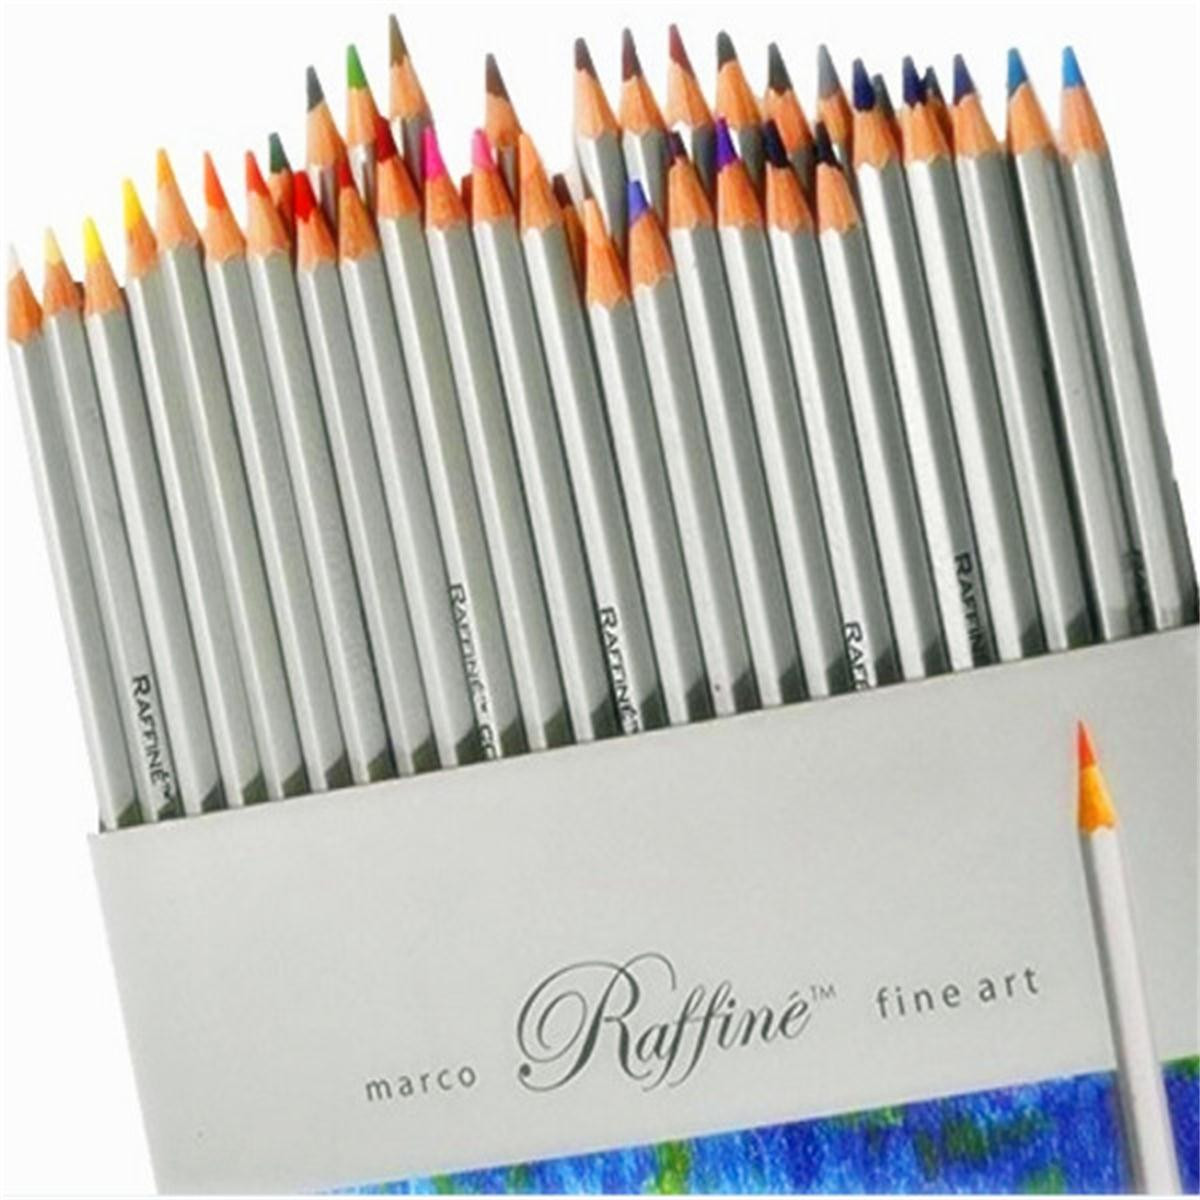 72-Colors-Art-Drawing-Pencil-Set-Oil-Non-toxic-Pencils-Painting-Sketching-Drawing-Stationery-School--973251-6